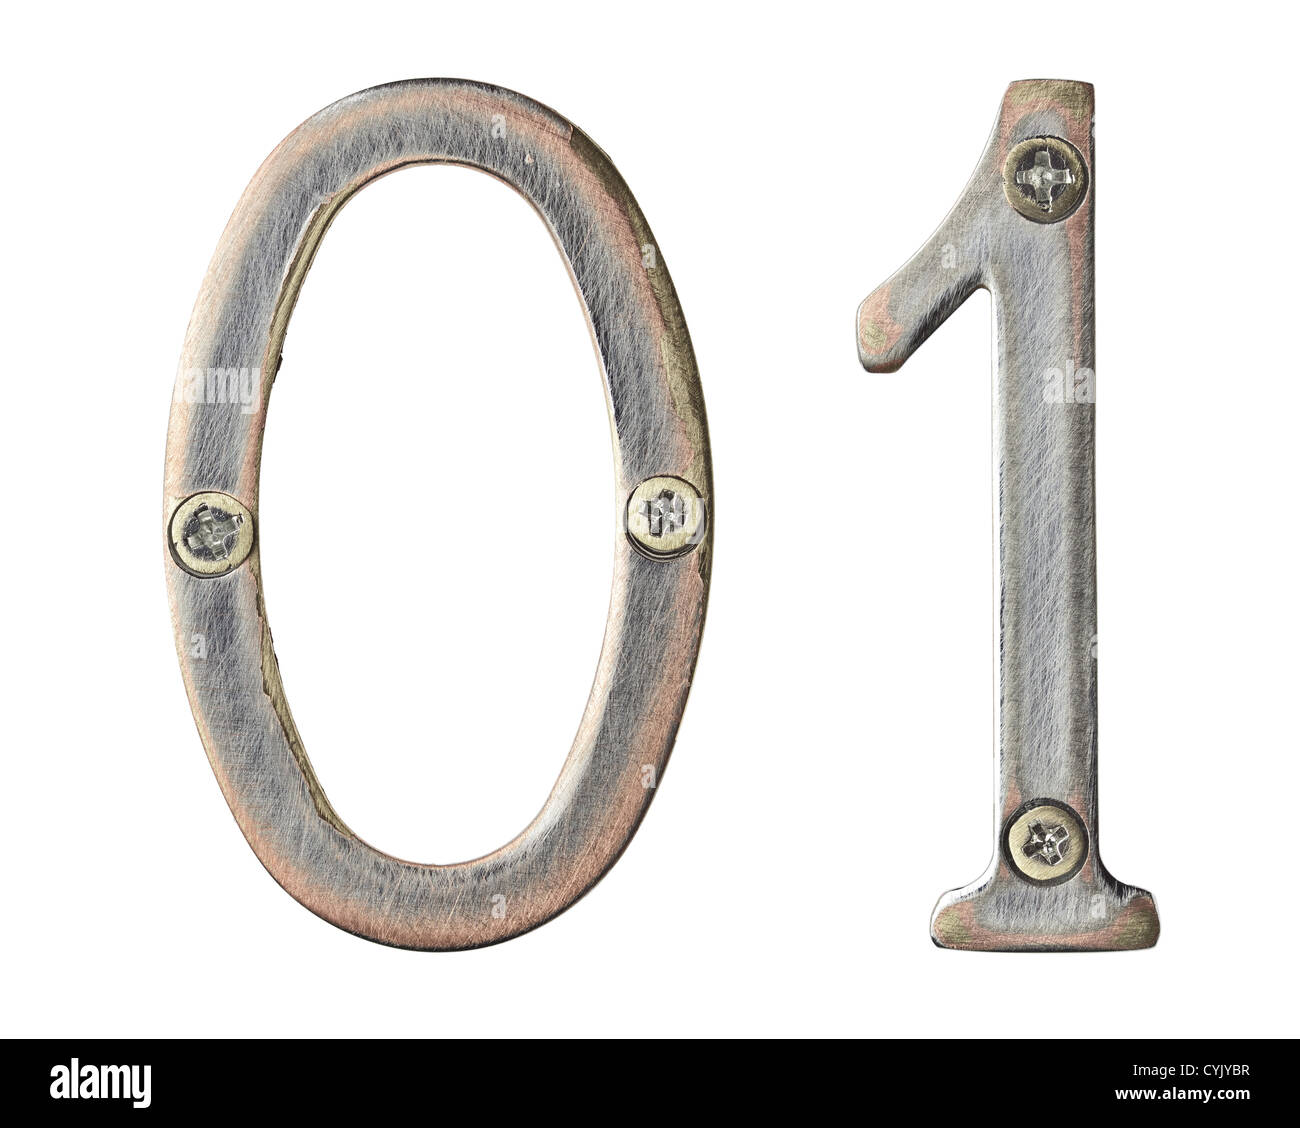 Aged metal numbers with screw heads Stock Photo